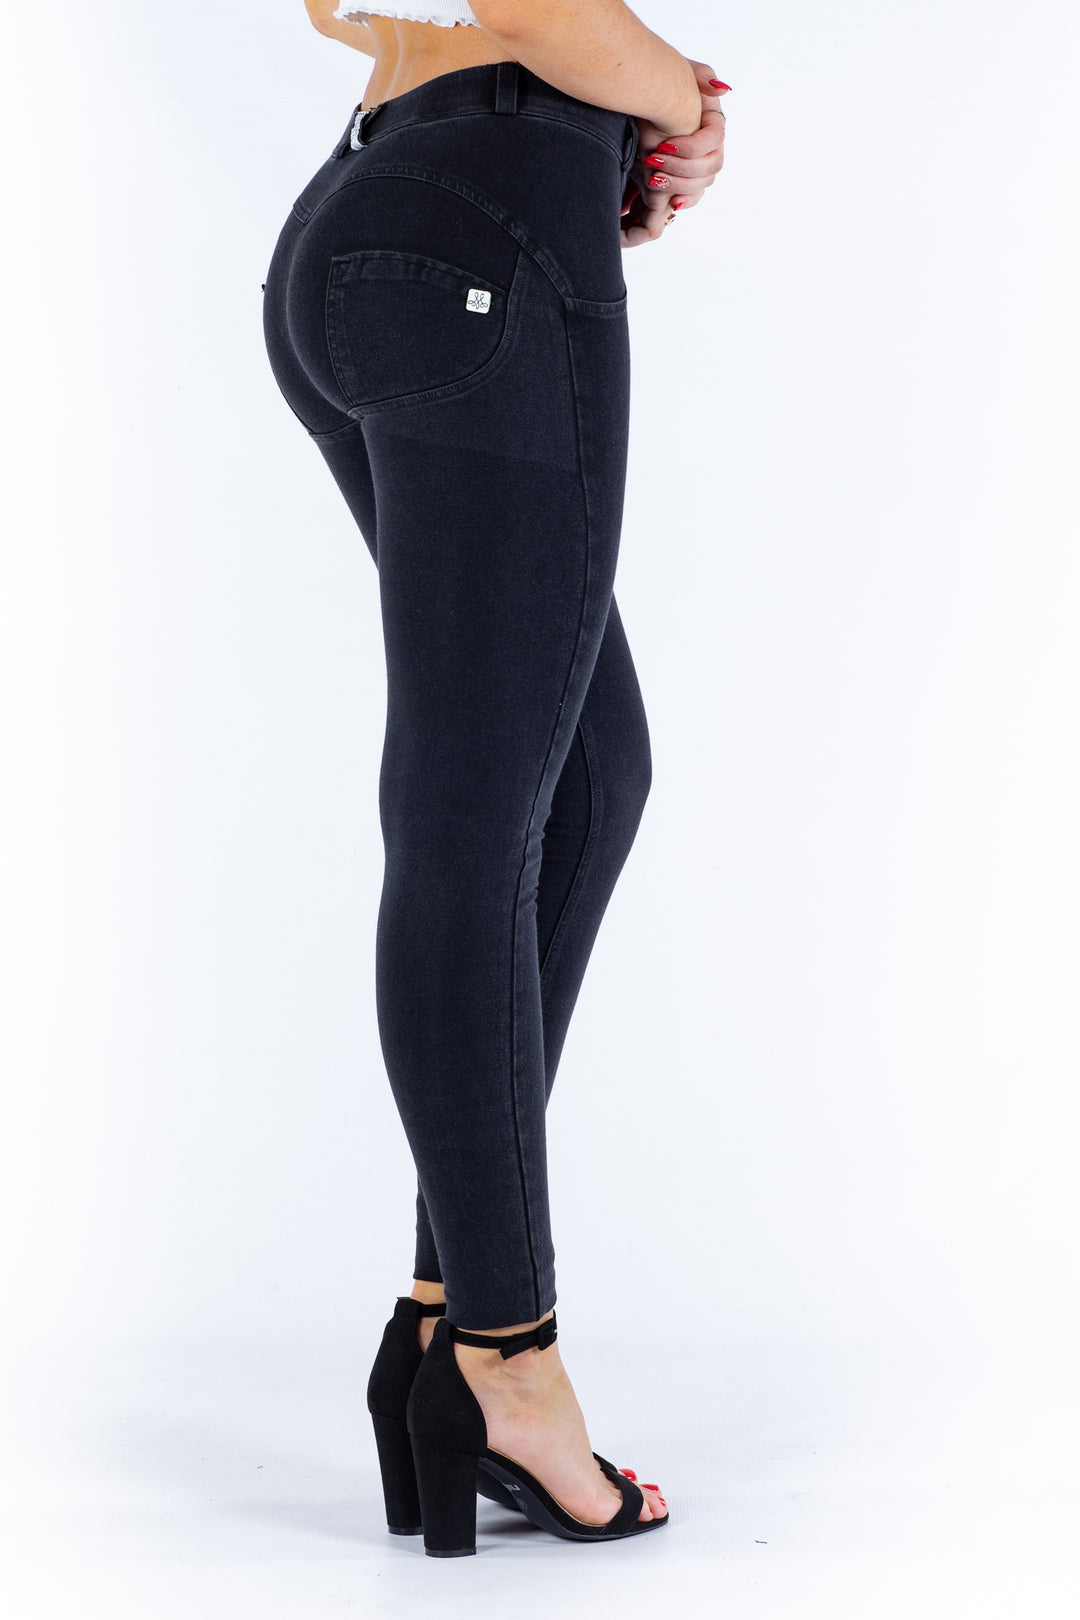 Mid waist Butt lifting Shaping Jeans/Jeggings - Black washaos-init aos-animate